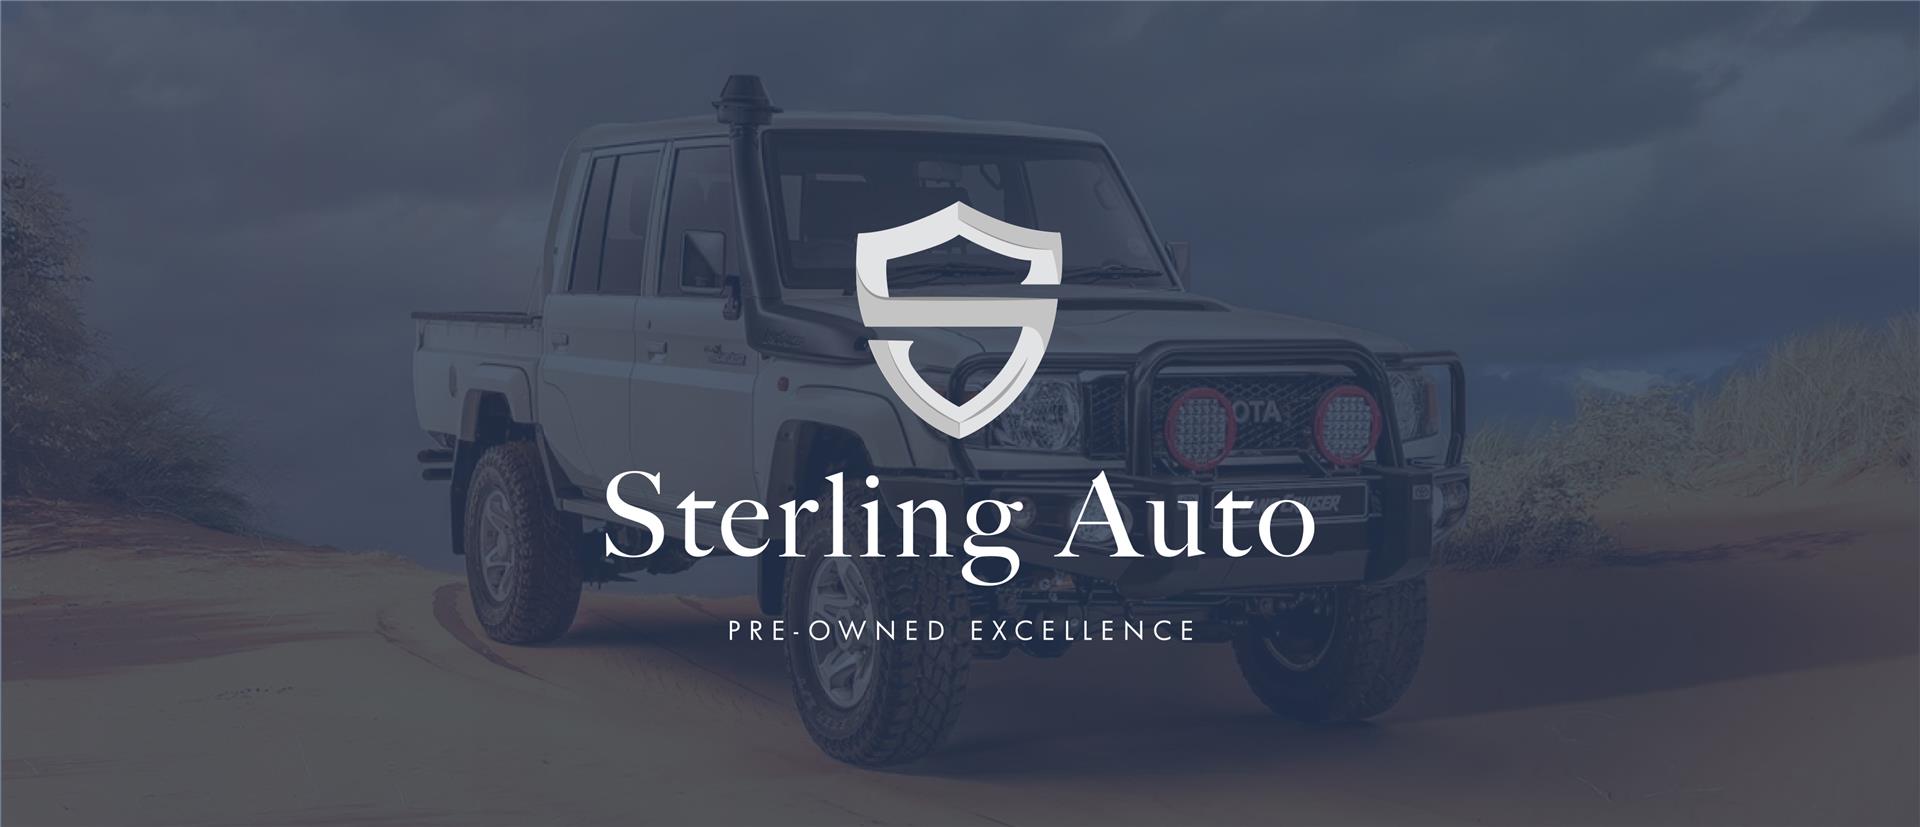 welcome to sterling auto